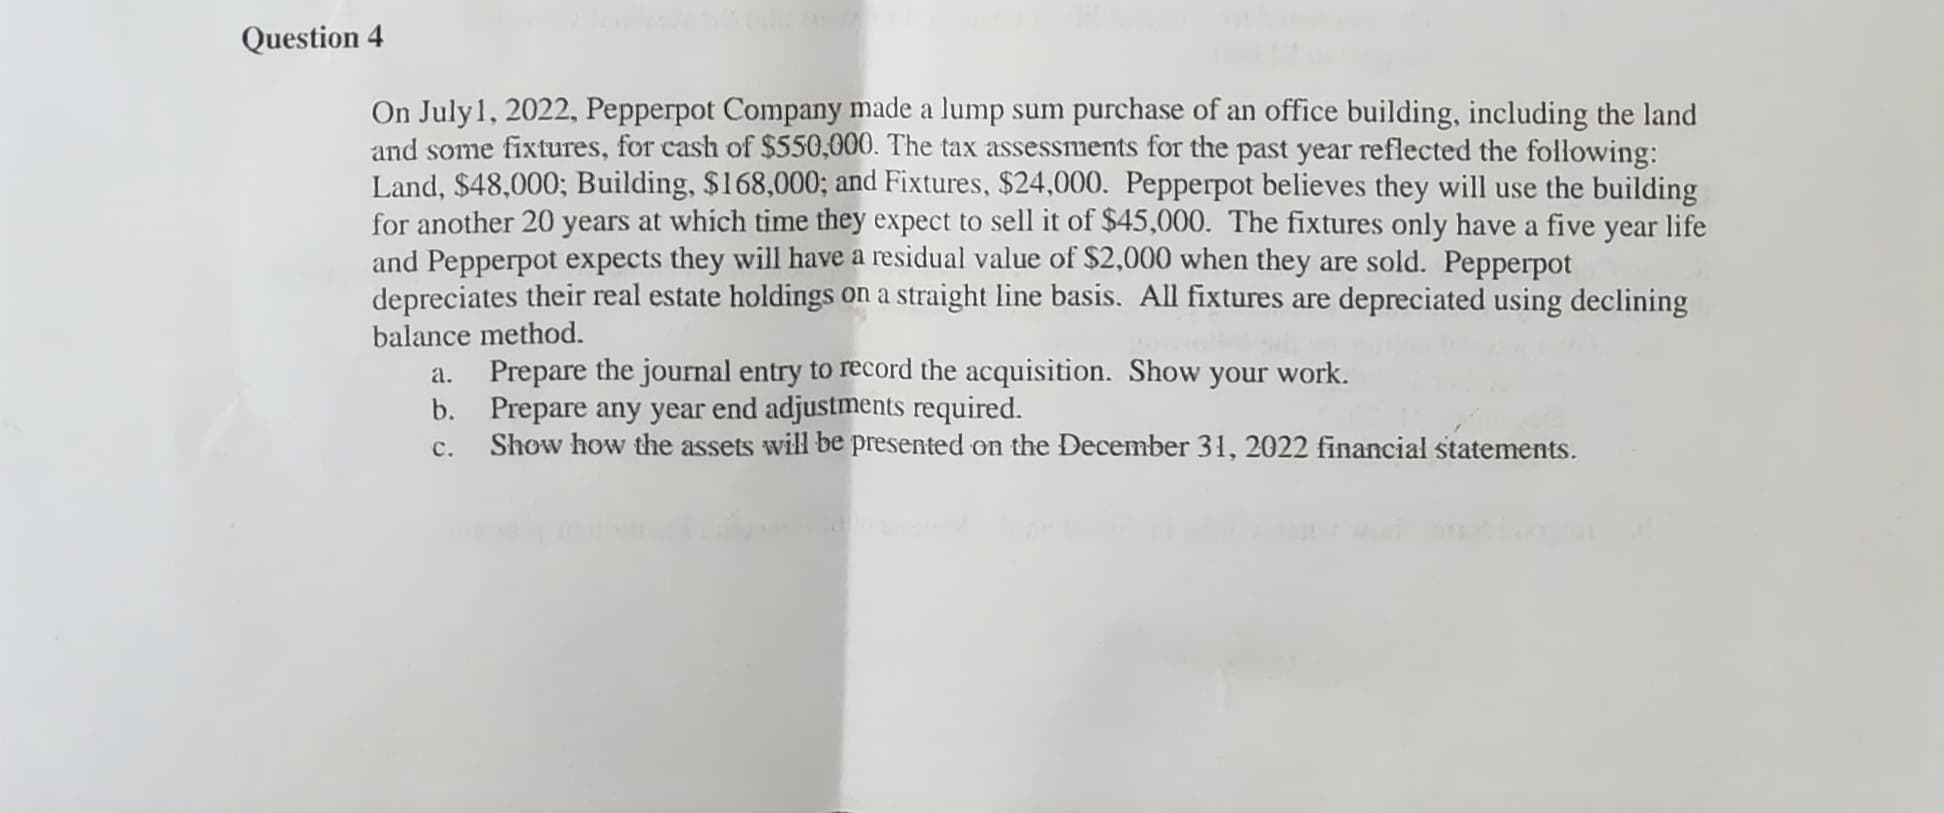 Question 4
On July 1, 2022, Pepperpot Company made a lump sum purchase of an office building, including the land
and some fixtures, for cash of $550,000. The tax assessments for the past year reflected the following:
Land, $48,000; Building, $168,000; and Fixtures, $24,000. Pepperpot believes they will use the building
for another 20 years at which time they expect to sell it of $45,000. The fixtures only have a five year life
and Pepperpot expects they will have a residual value of $2,000 when they are sold. Pepperpot
depreciates their real estate holdings on a straight line basis. All fixtures are depreciated using declining
balance method.
a.
b.
c.
Prepare the journal entry to record the acquisition. Show your work.
Prepare any year end adjustments required.
Show how the assets will be presented on the December 31, 2022 financial statements.